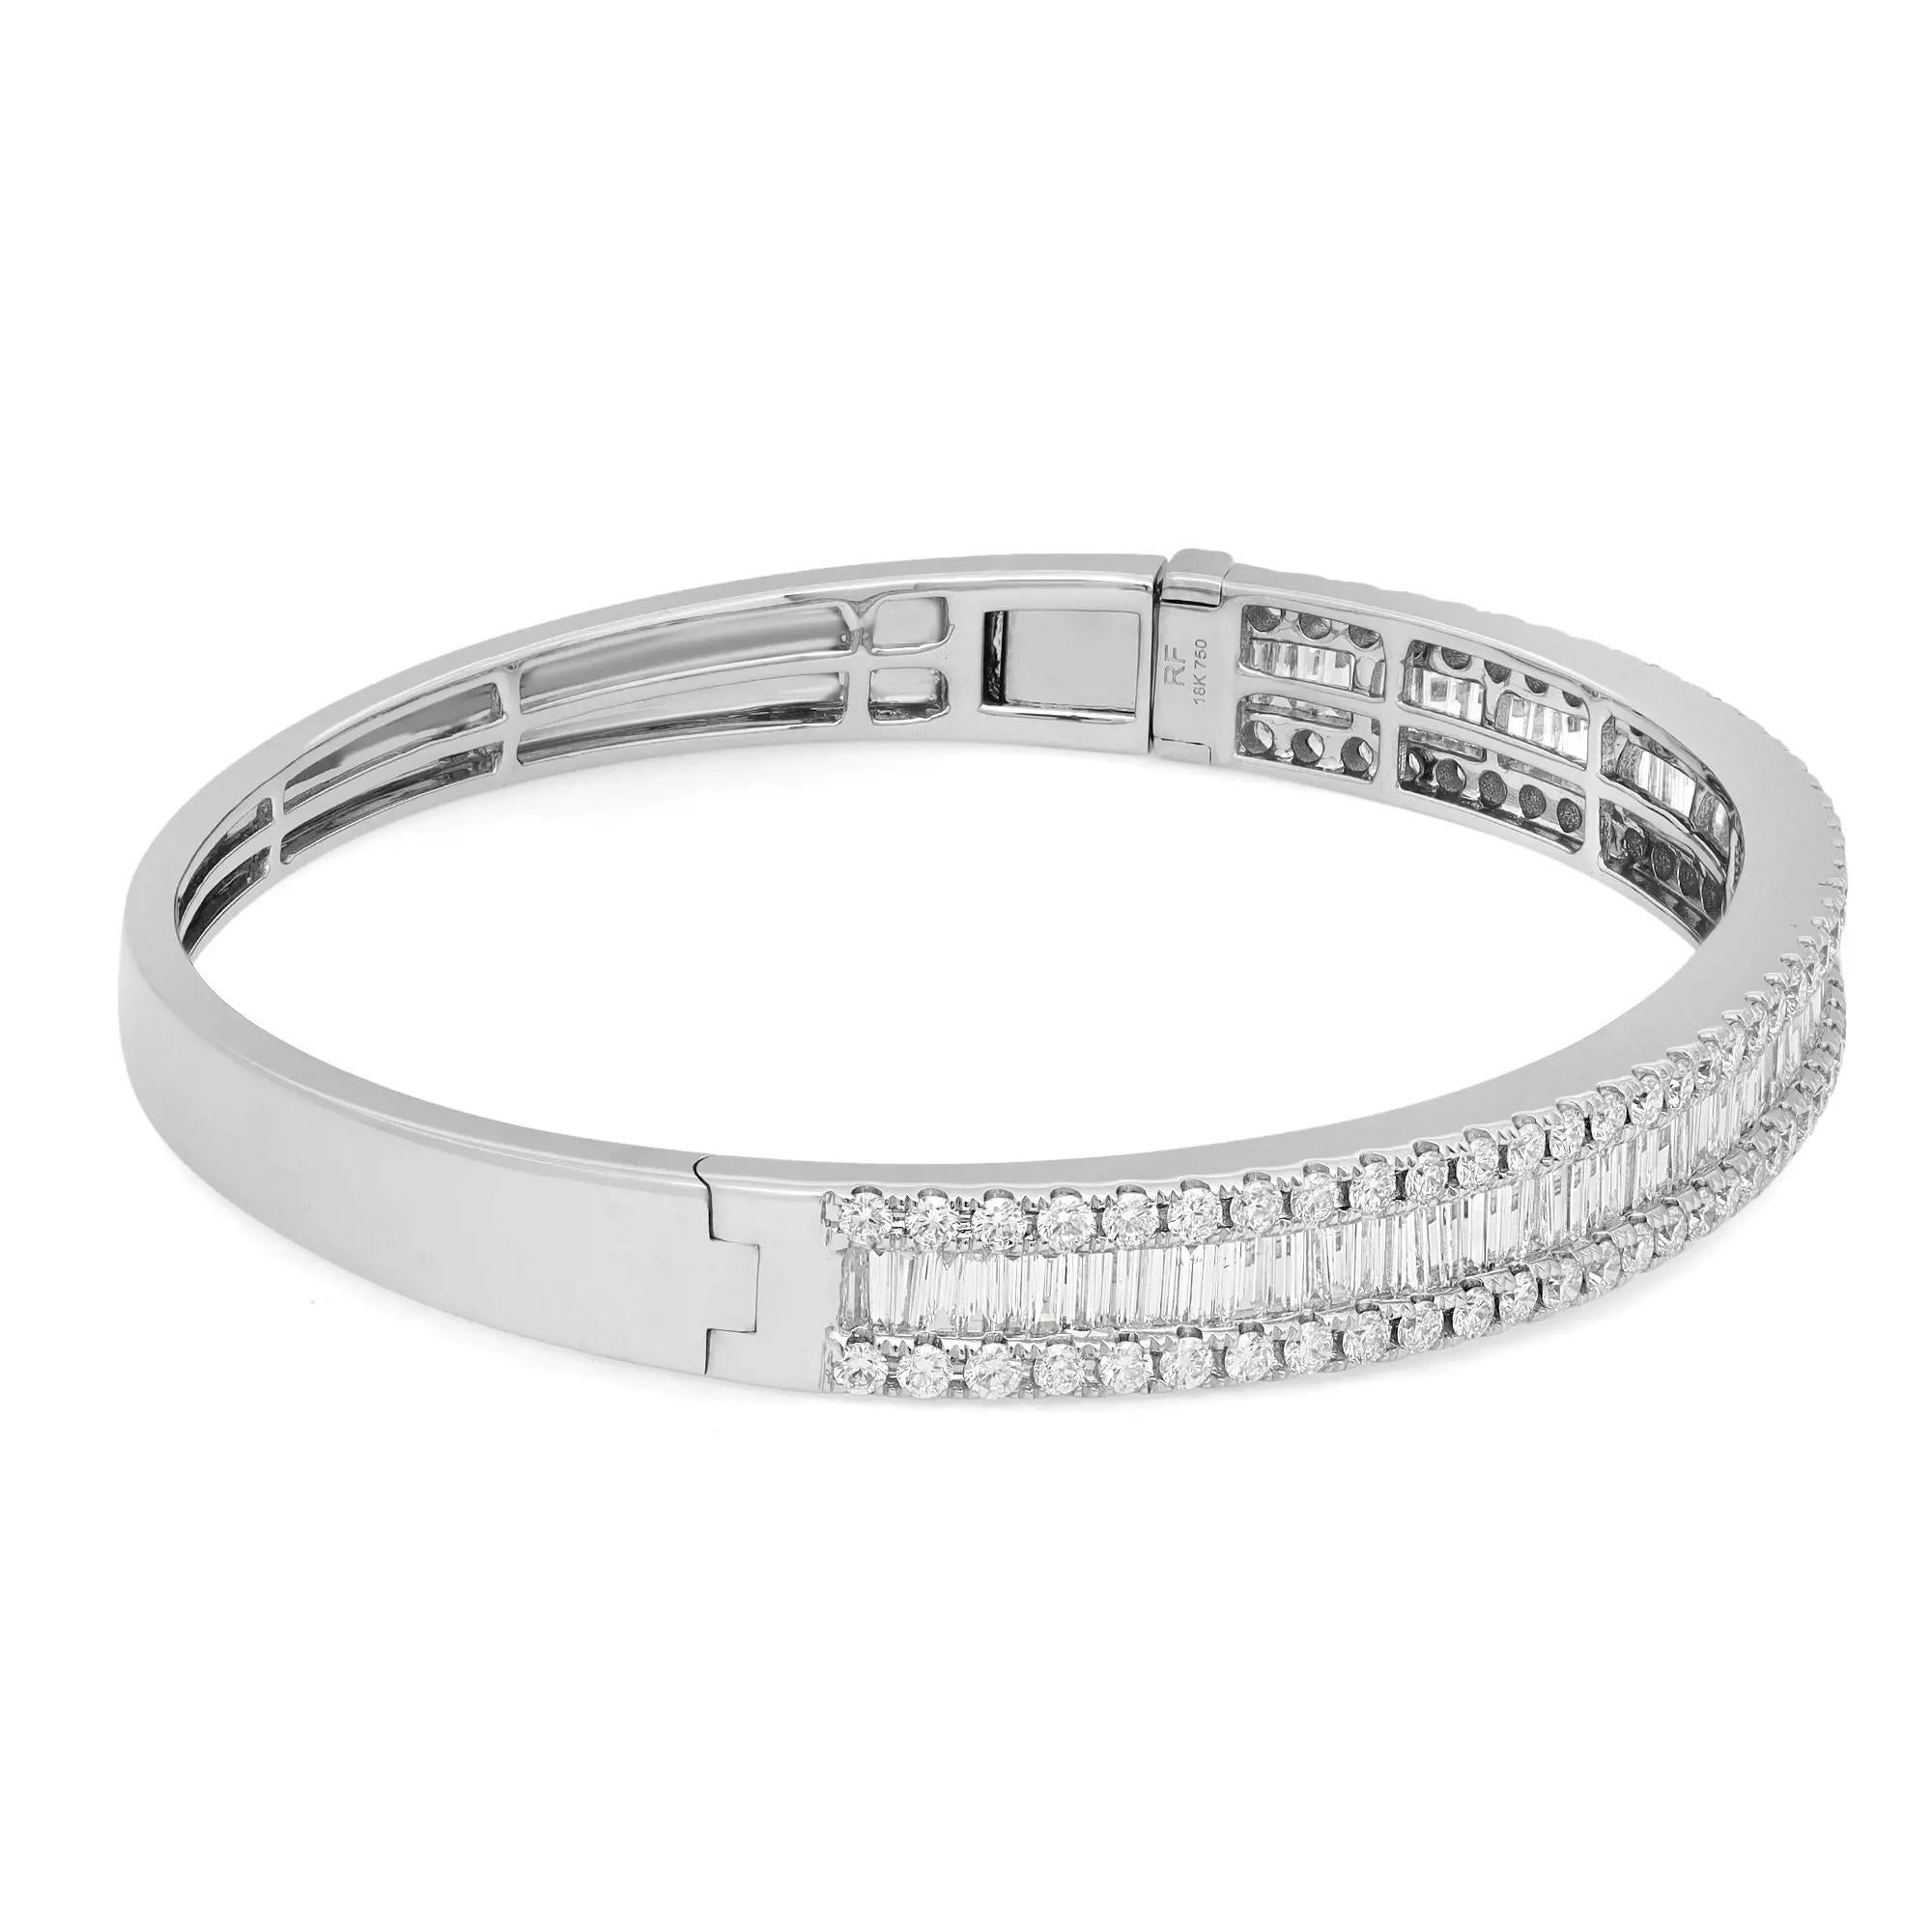 3.12Cttw Baguette & Round Cut Diamond Bangle Bracelet 18K White Gold In New Condition For Sale In New York, NY